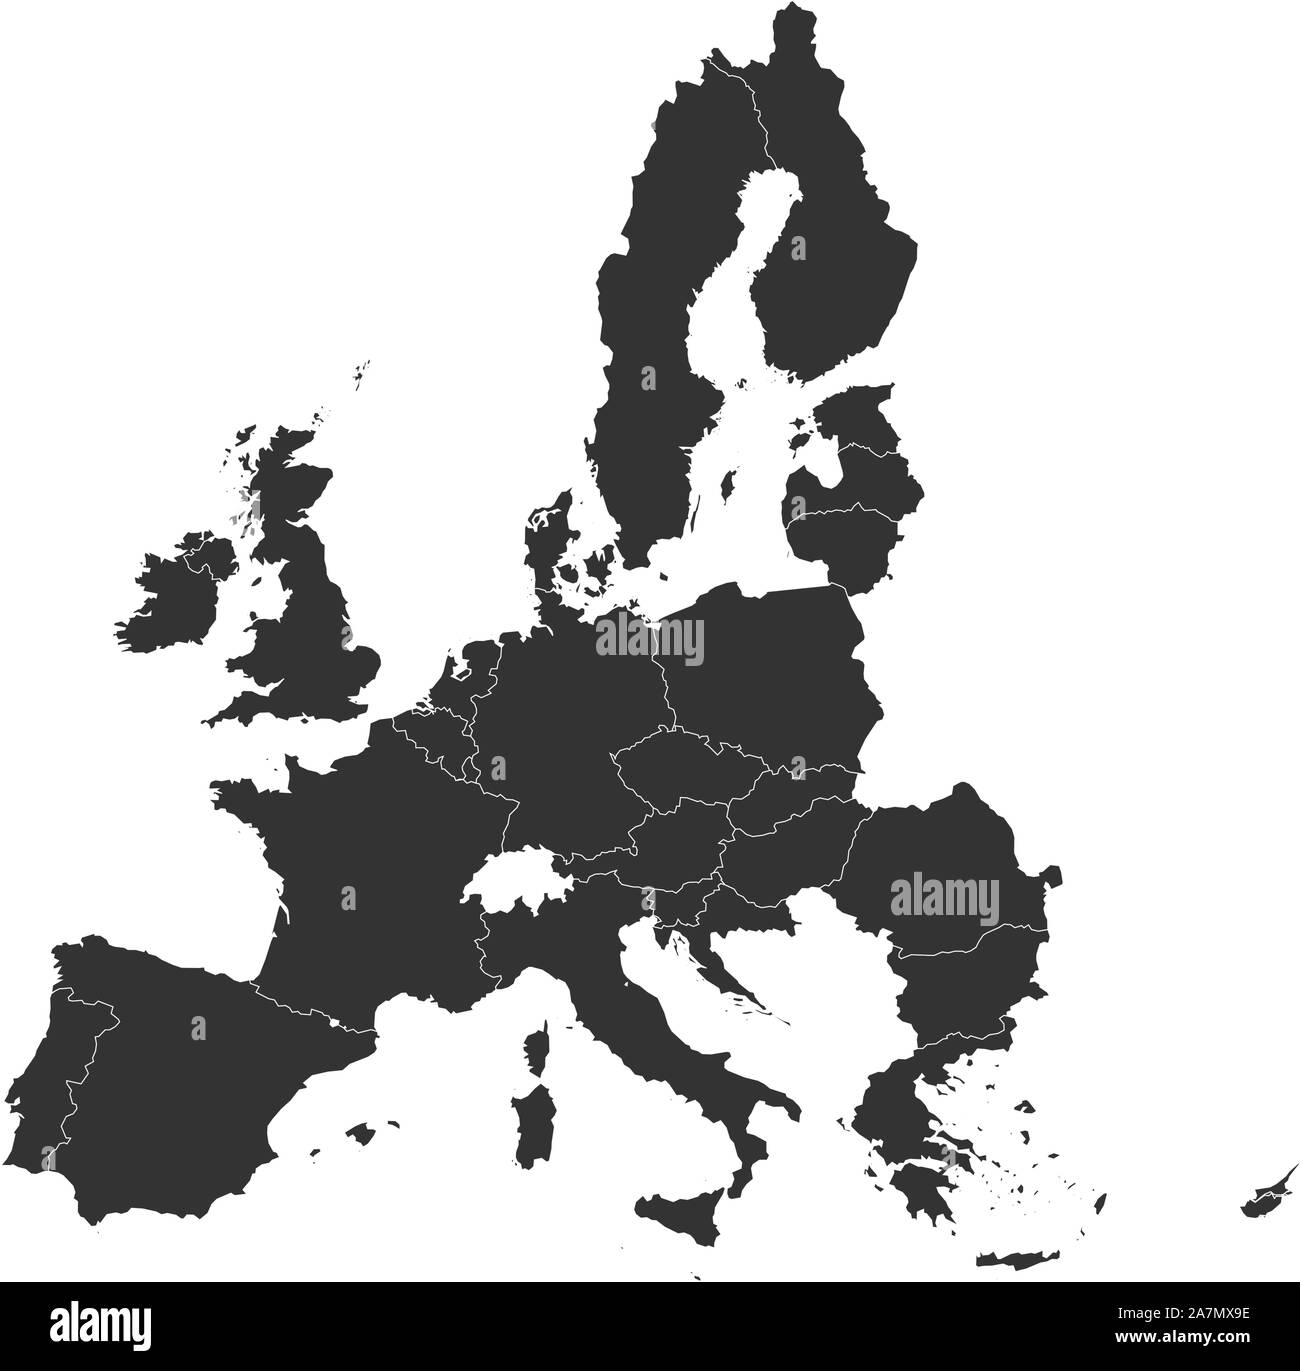 All European union counties map with boundaries vector illustration. Dark gray. Stock Vector